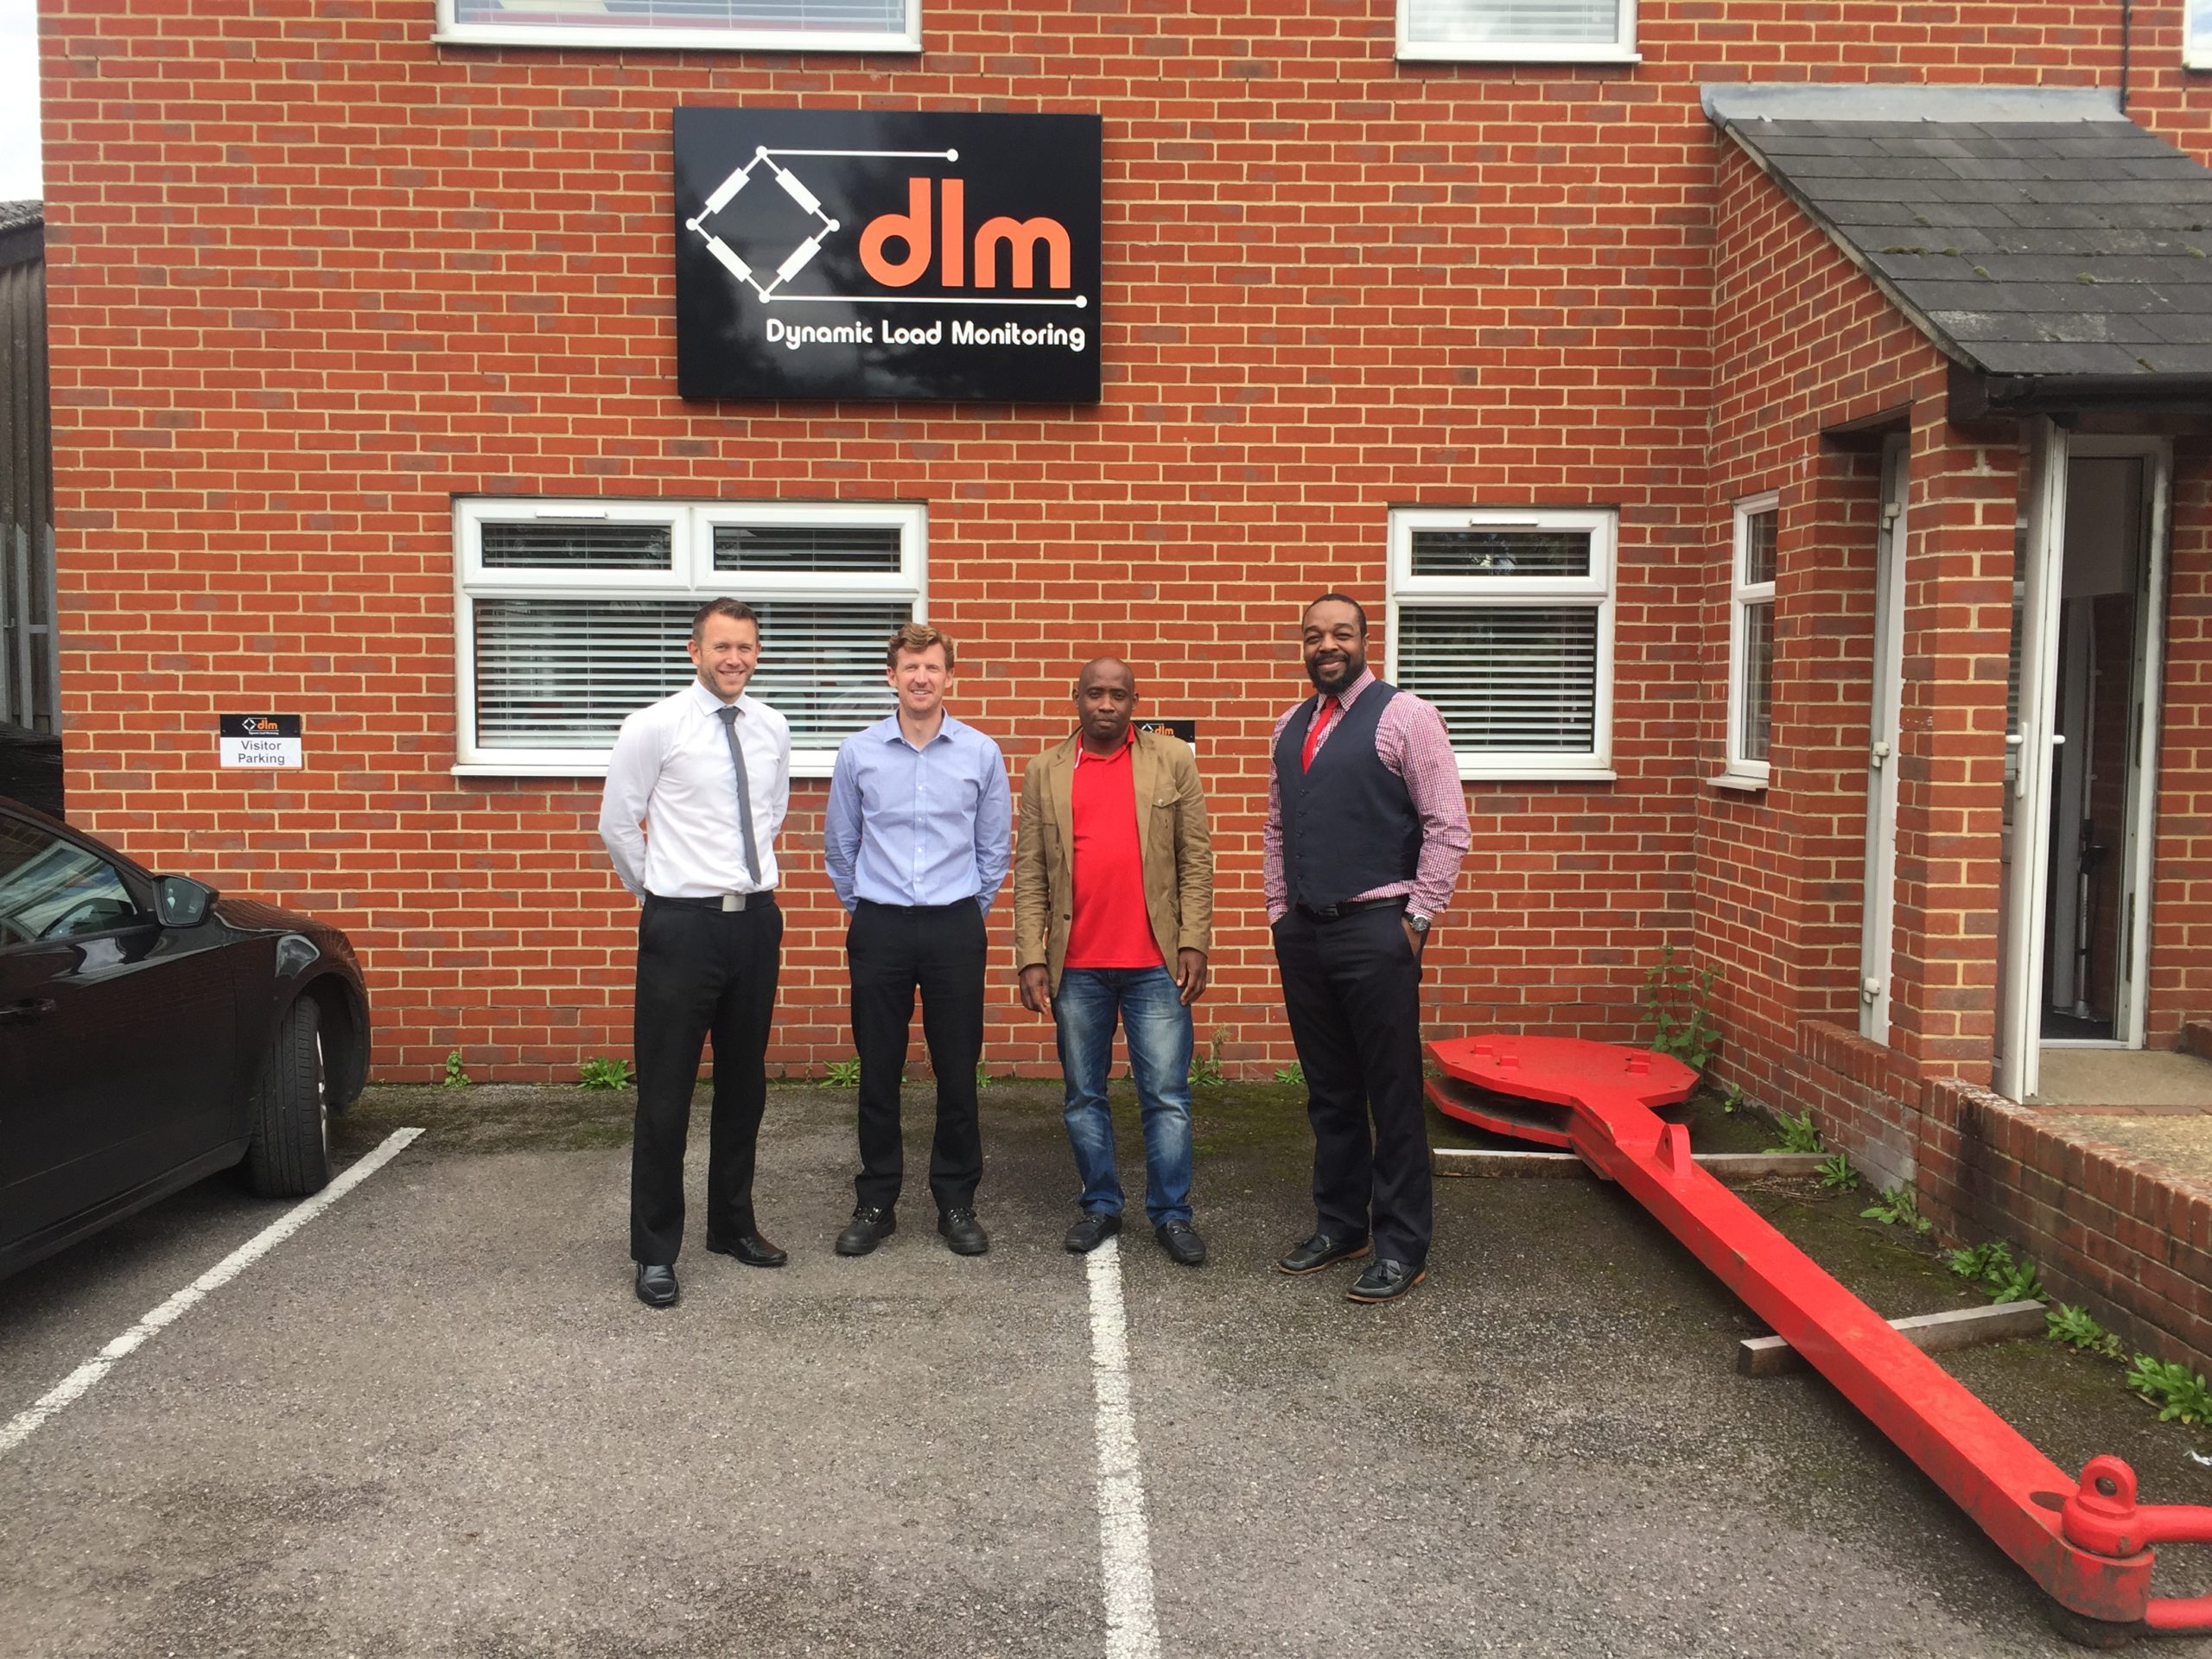 Chant Engineering Business Partner, DLM, Loads Up With More Distributors